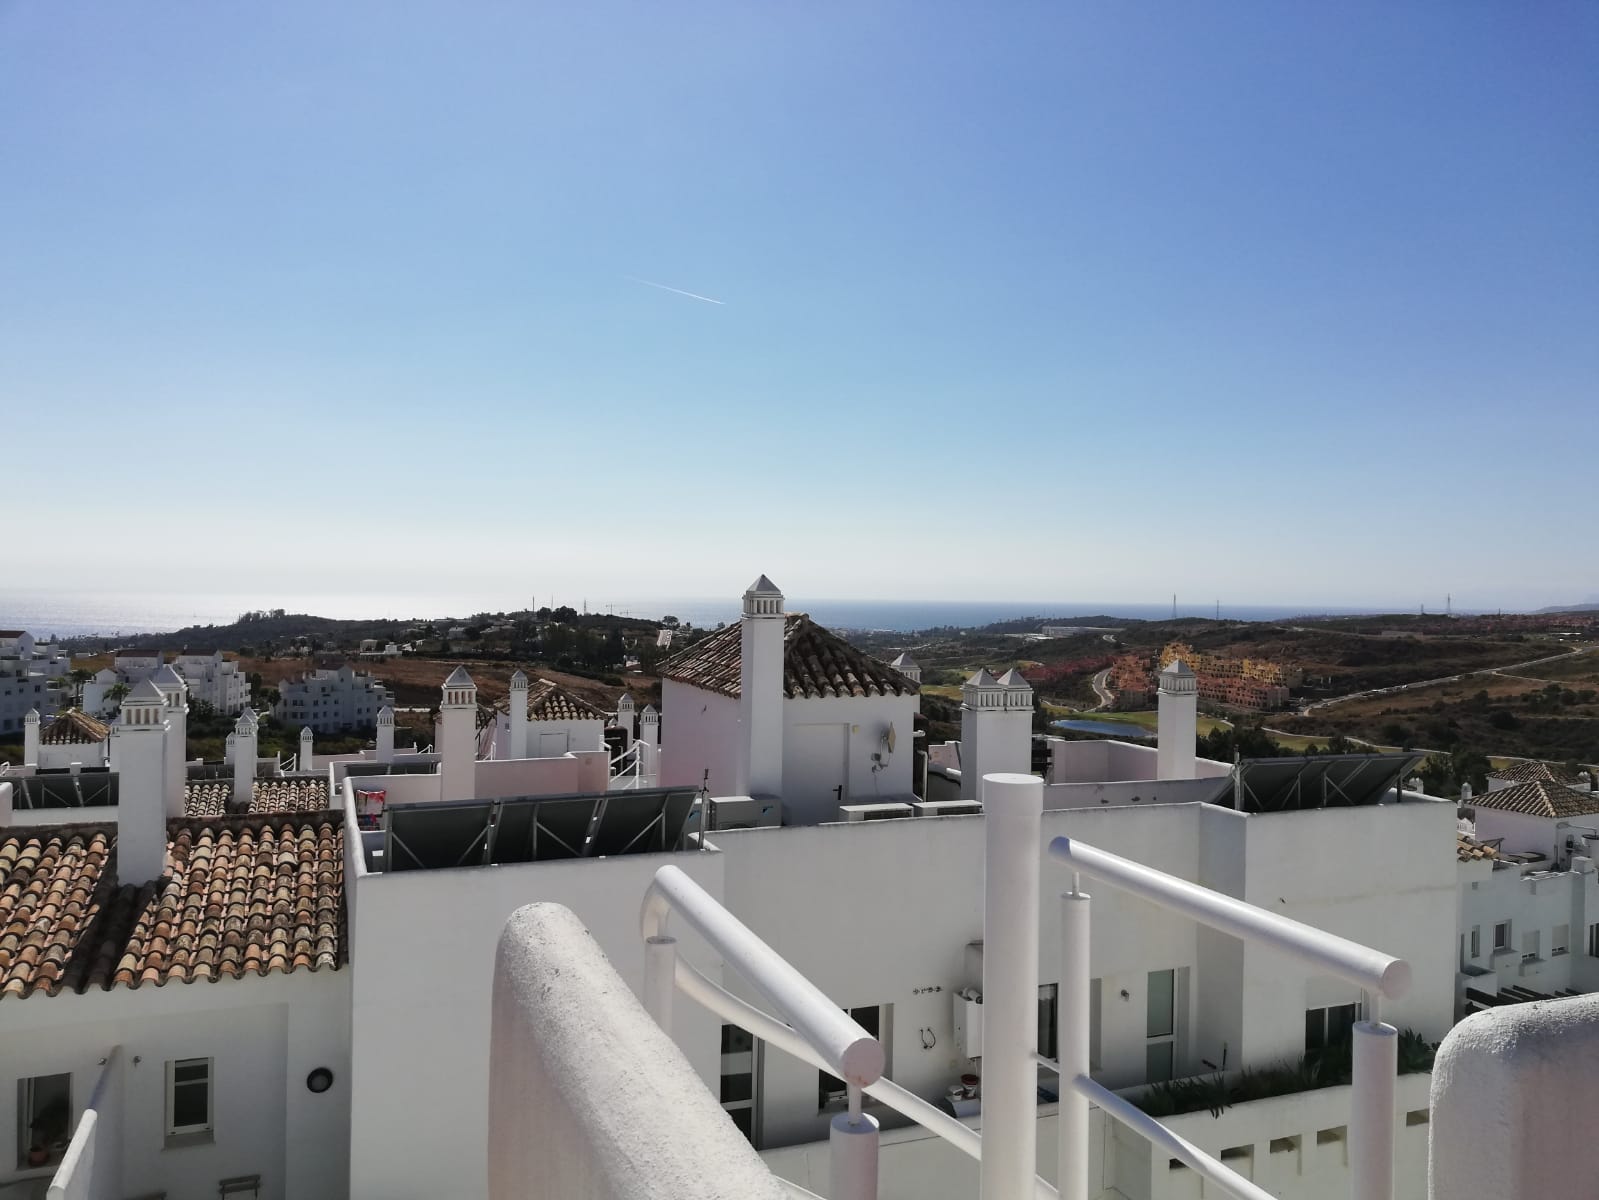 2 bedroom penthouse in Valle Romano opposite the golf course for rent - mibgroup.es